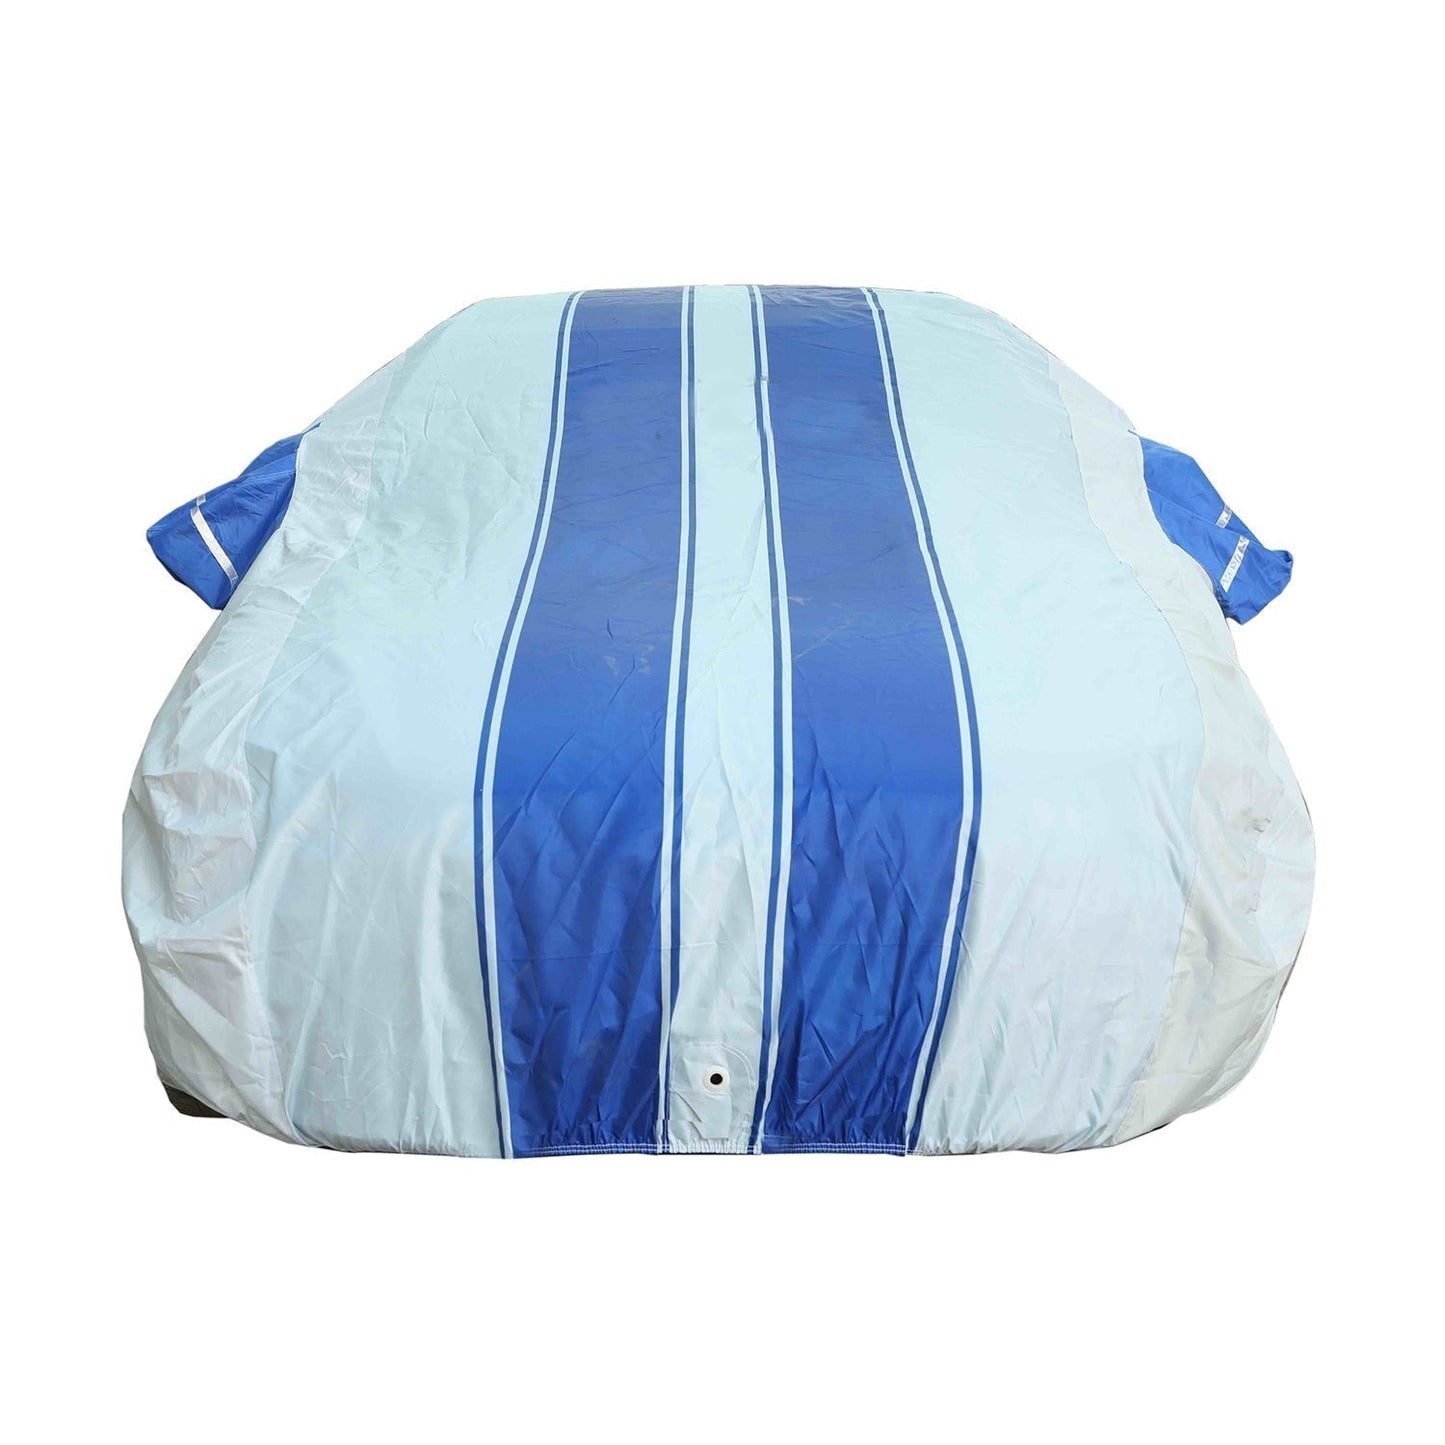 Oshotto 100% Blue dustproof and Water Resistant Car Body Cover with Mirror Pockets For Ford Fiesta